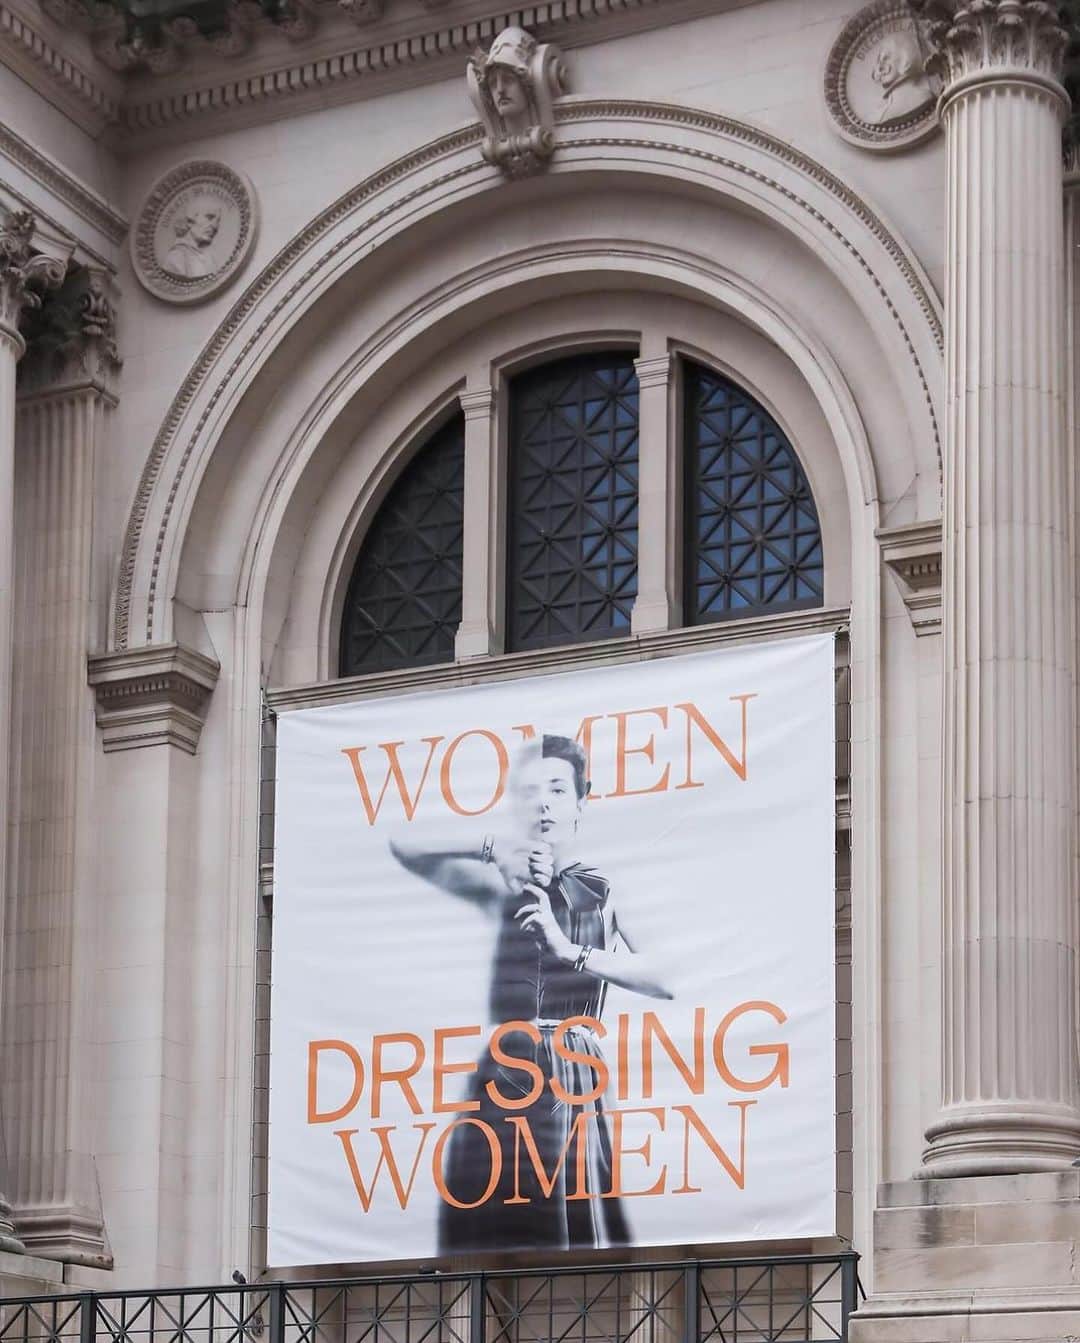 トームのインスタグラム：「Imagine this was the focus of the #metgala #repost @metcostumeinstitute   #WomenDressingWomen opens today! The exhibition features the work of over 70 womenswear designers including Claire McCardell, who graces @metmuseum’s façade wearing a dress of her own design, on view in the exhibition.⁣  From the @guardian_us (see slide 3)  This is an industrywide problem. Of the top 30 luxury brands in the Vogue Business Index, eight out of 33 creative director roles are currently held by women – and only one, Sandra Choi of Jimmy Choo, is a woman of colour. There are two non-white men in creative director roles: Pharrell Williams at Louis Vuitton menswear and Maximilian Davis at Ferragamo. Olivier Rousteing at Balmain is the only other man of colour at one of the major fashion houses. Fashion and identity commentator Caryn Franklin is at pains to point out that all these men are talented. “All of the leaders justify that it’s on a merit basis only – what they don’t recognise is that it’s so much harder for other minoritised creatives to get to that place where it’s merit-based only.” The diversity problem does seem to be getting worse in fashion – recent analysis showed that the proportion of female creative directors is lower now than it was 15 years ago. “Misogyny is rife in this industry,” says Jeanie Annan-Lewin, creative director of Perfect magazine. “We’re marketing clothes to women but they normally all come through the male gaze.” According to a 2022 report on diversity by the British Fashion Council, despite women making up the majority of customers, most senior roles in fashion are held by men. The percentage of women on executive committees hovering at about 40%. The picture when it came to ethnic diversity was bleaker, with only around 10% of boards made up of people from ethnic minority backgrounds.」